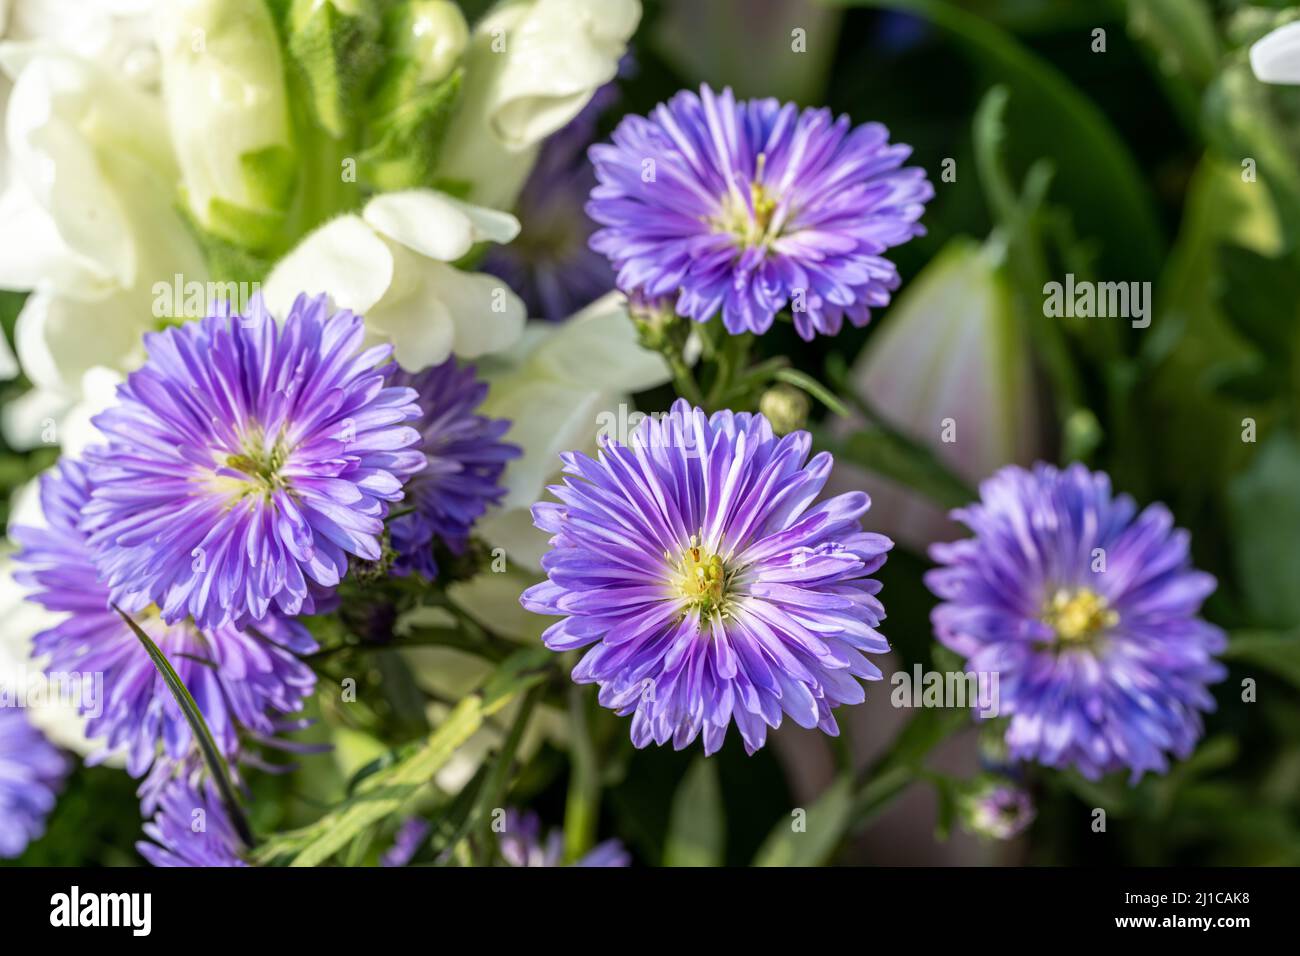 Violet, and purple Aster flowers starting to bloom with a shallow depth of field. Stock Photo